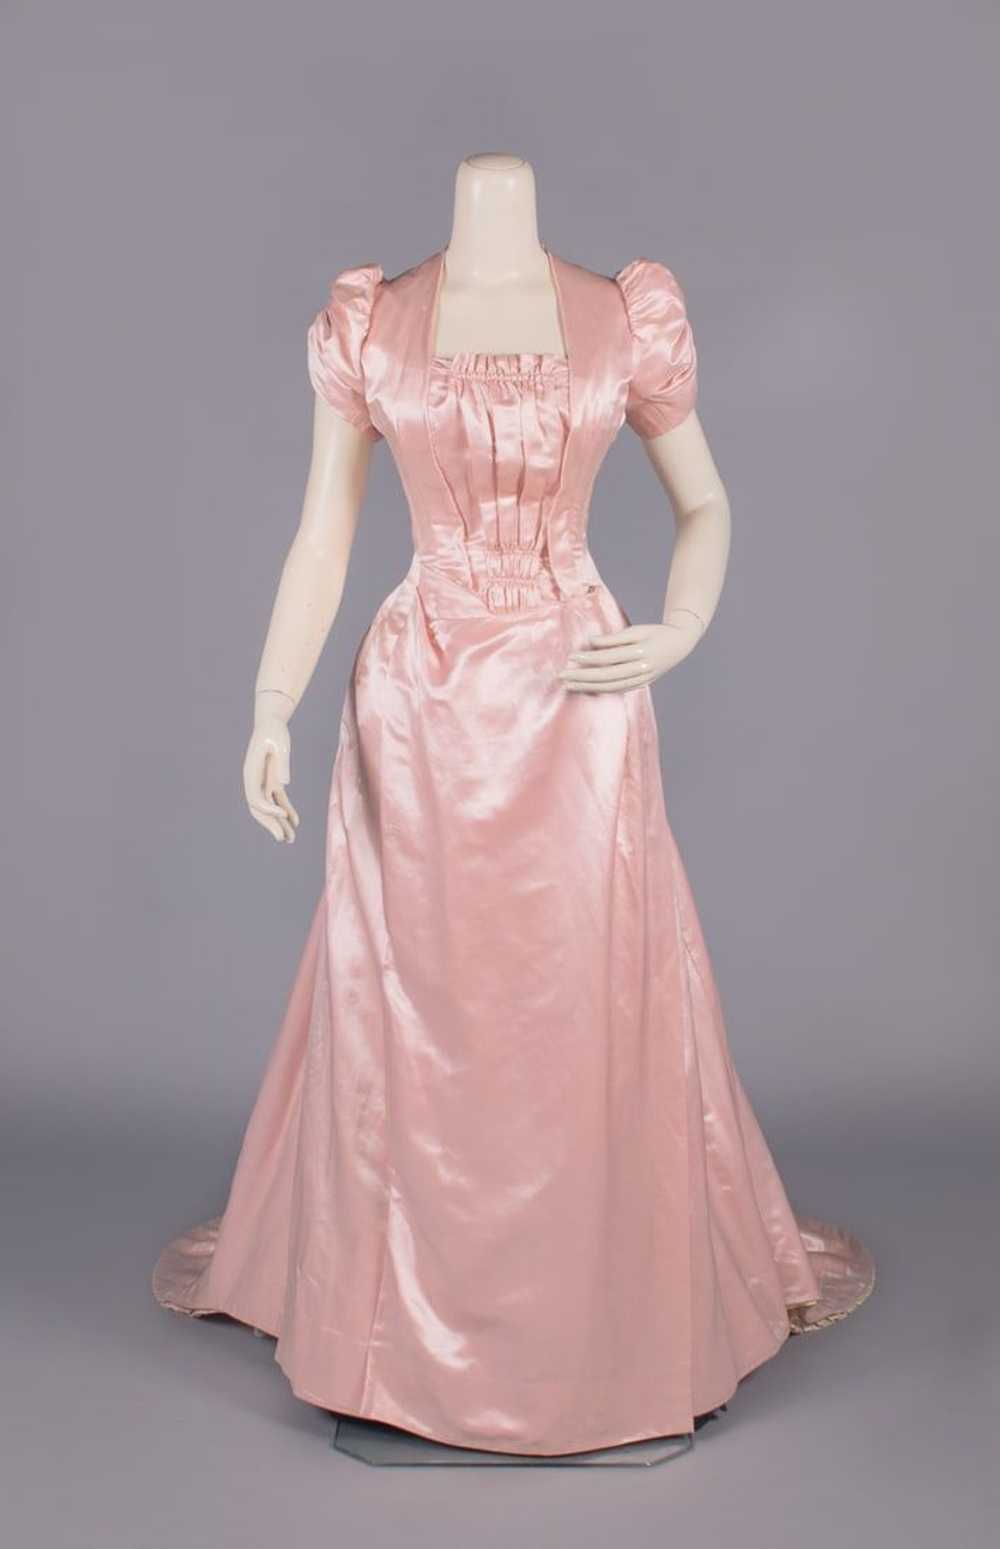 BLUSH PINK SILK SATIN EVENING GOWN, LATE 1880s - image 2